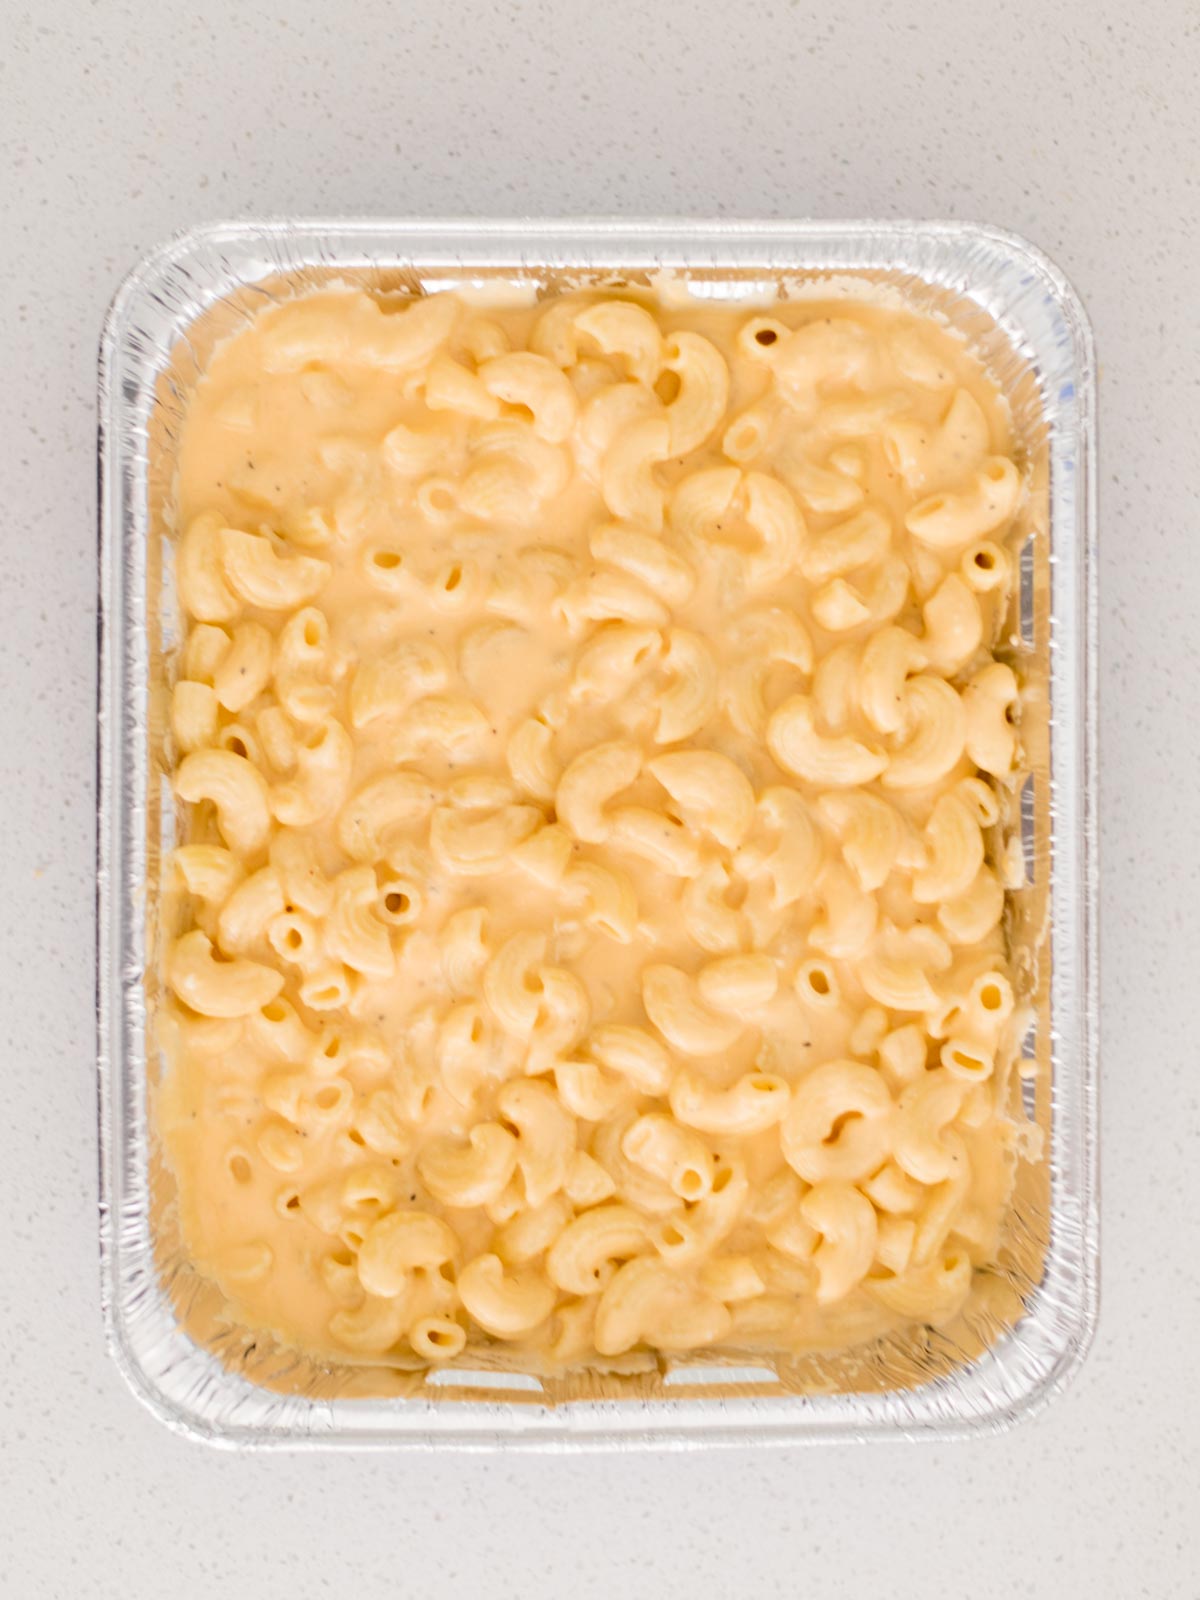 cheese sauce and cooked elbow pasta combined in disposable cake pan